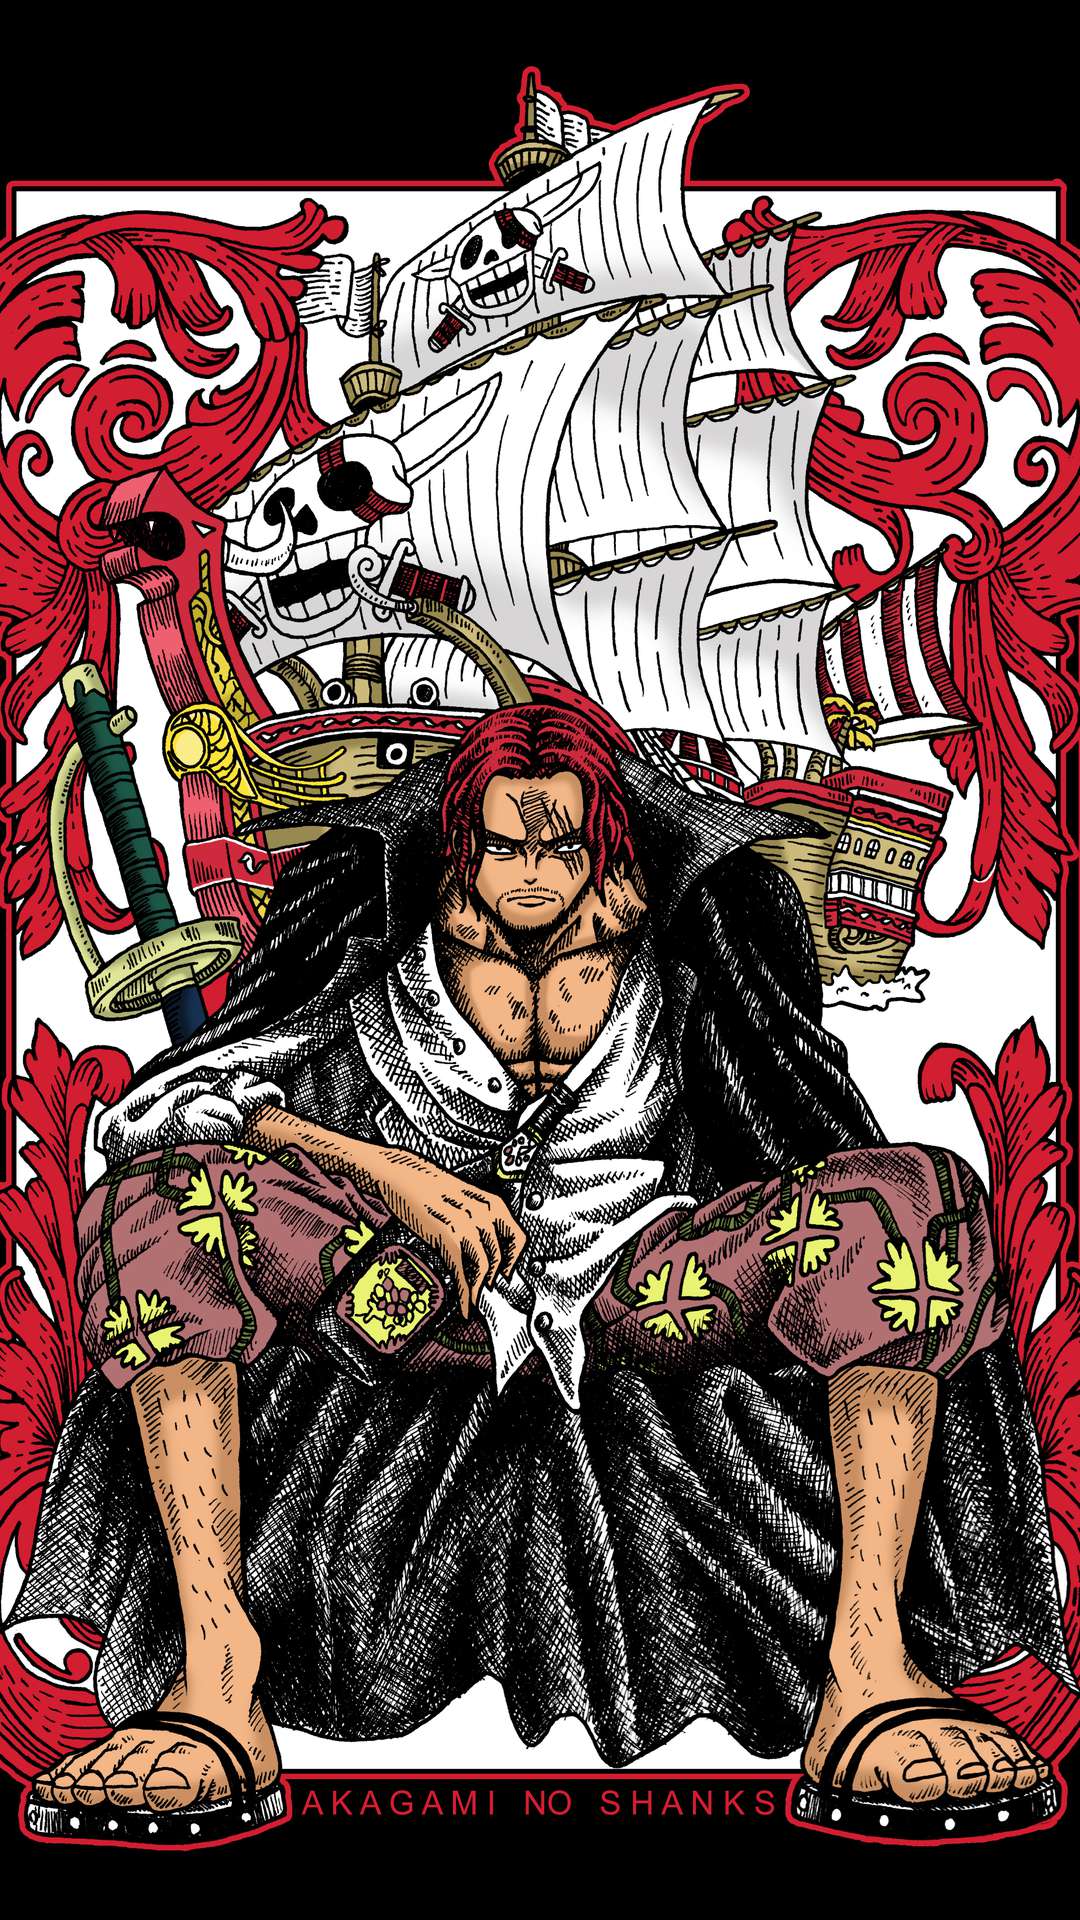 Wallpaper ID 453932  Anime One Piece Phone Wallpaper Shanks One Piece  720x1280 free download